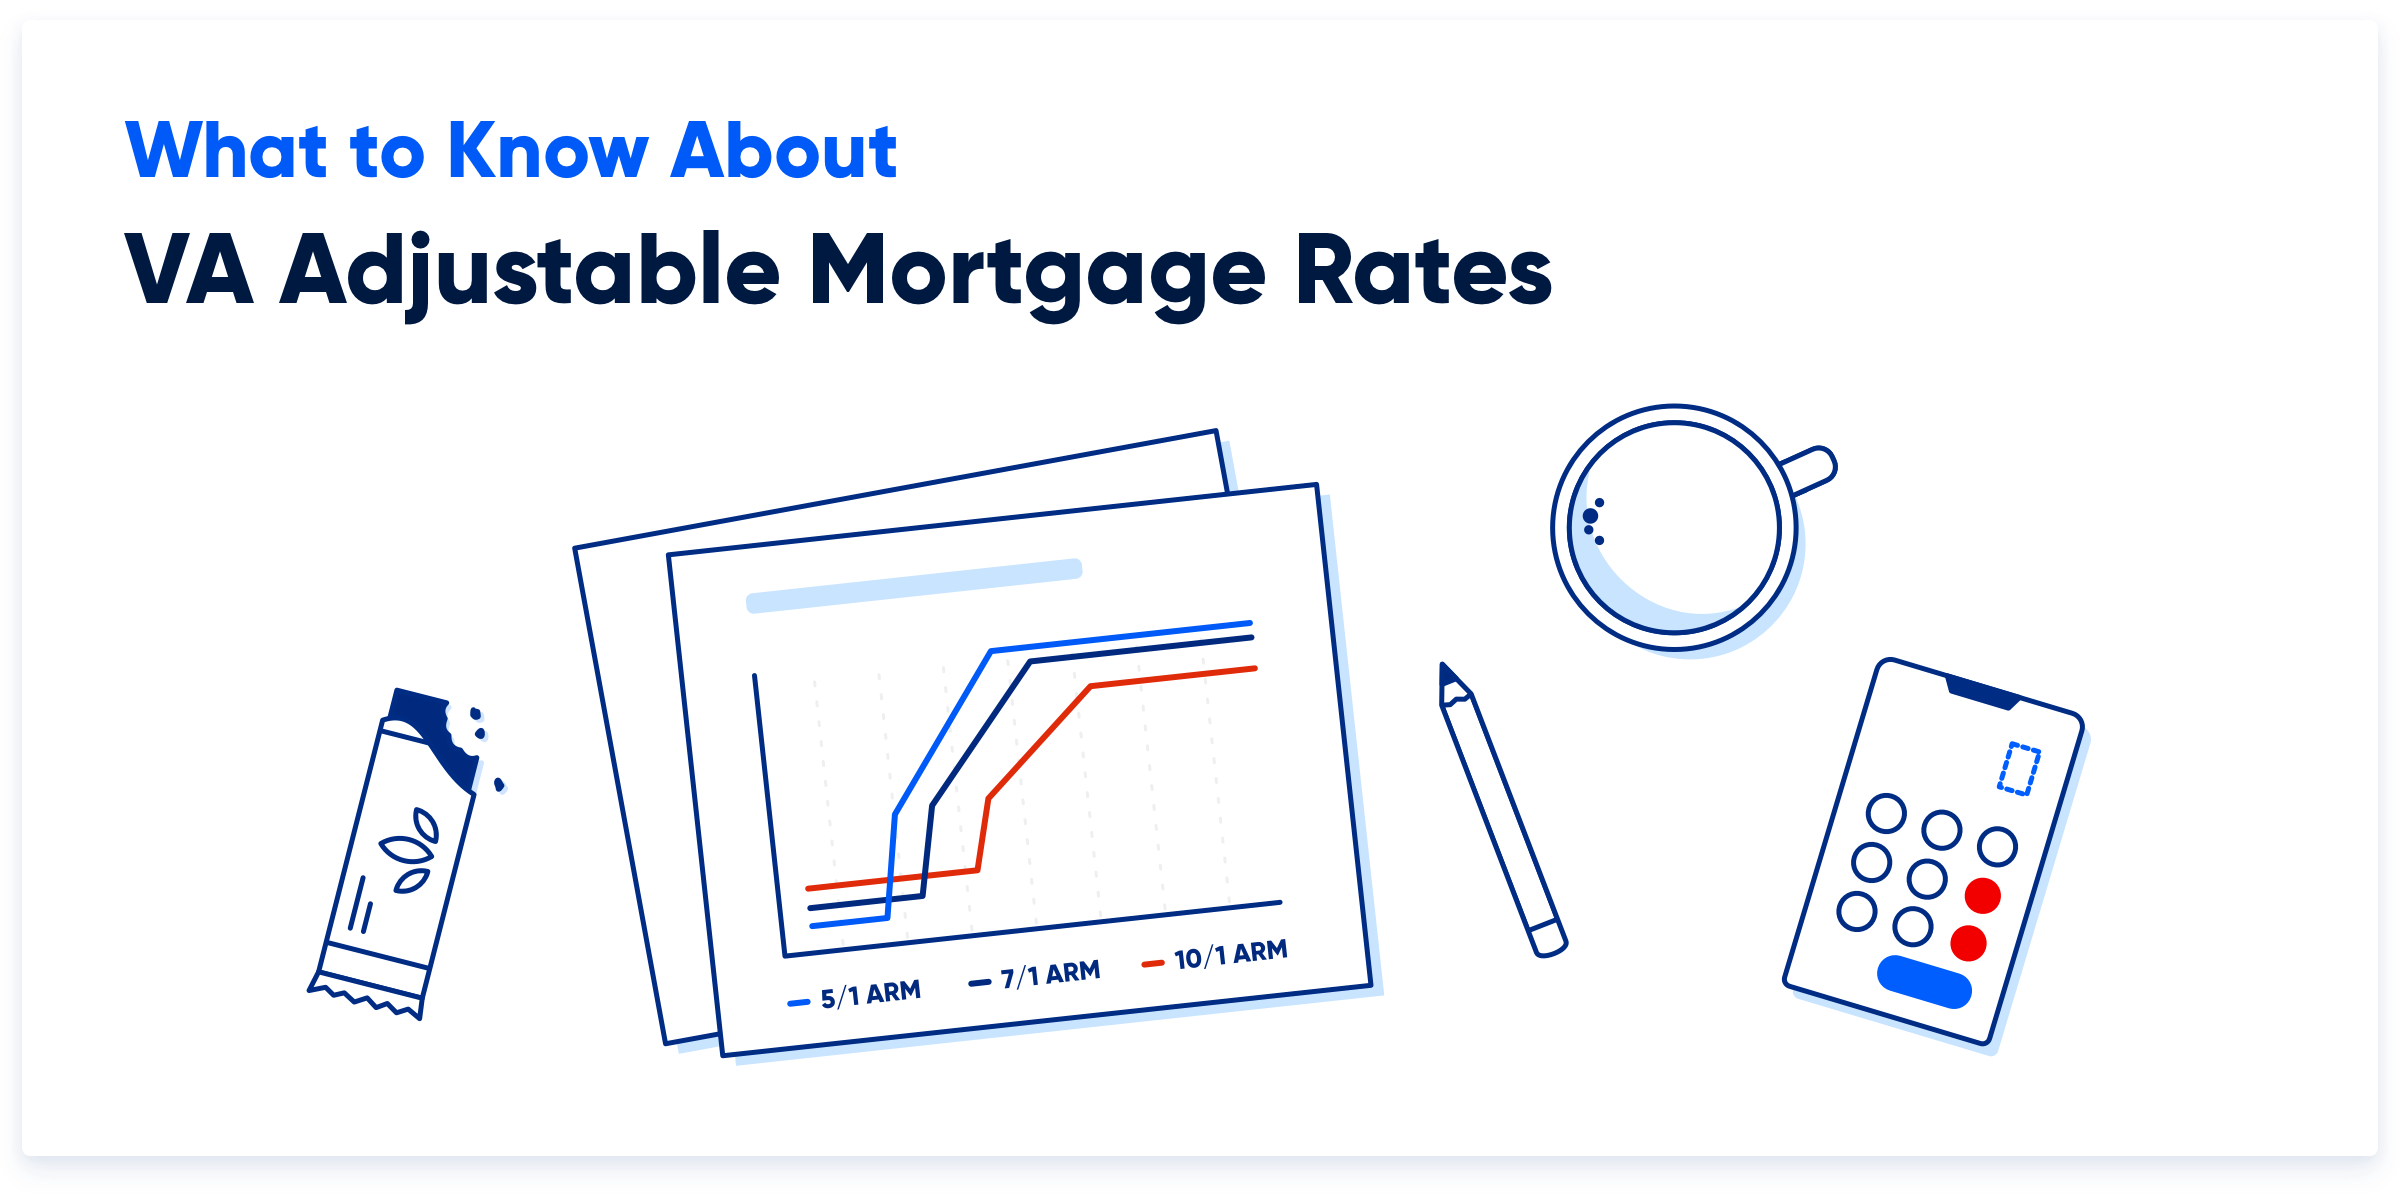 Illustration of adjustable-rate mortgage charts surrounded by various desk items.